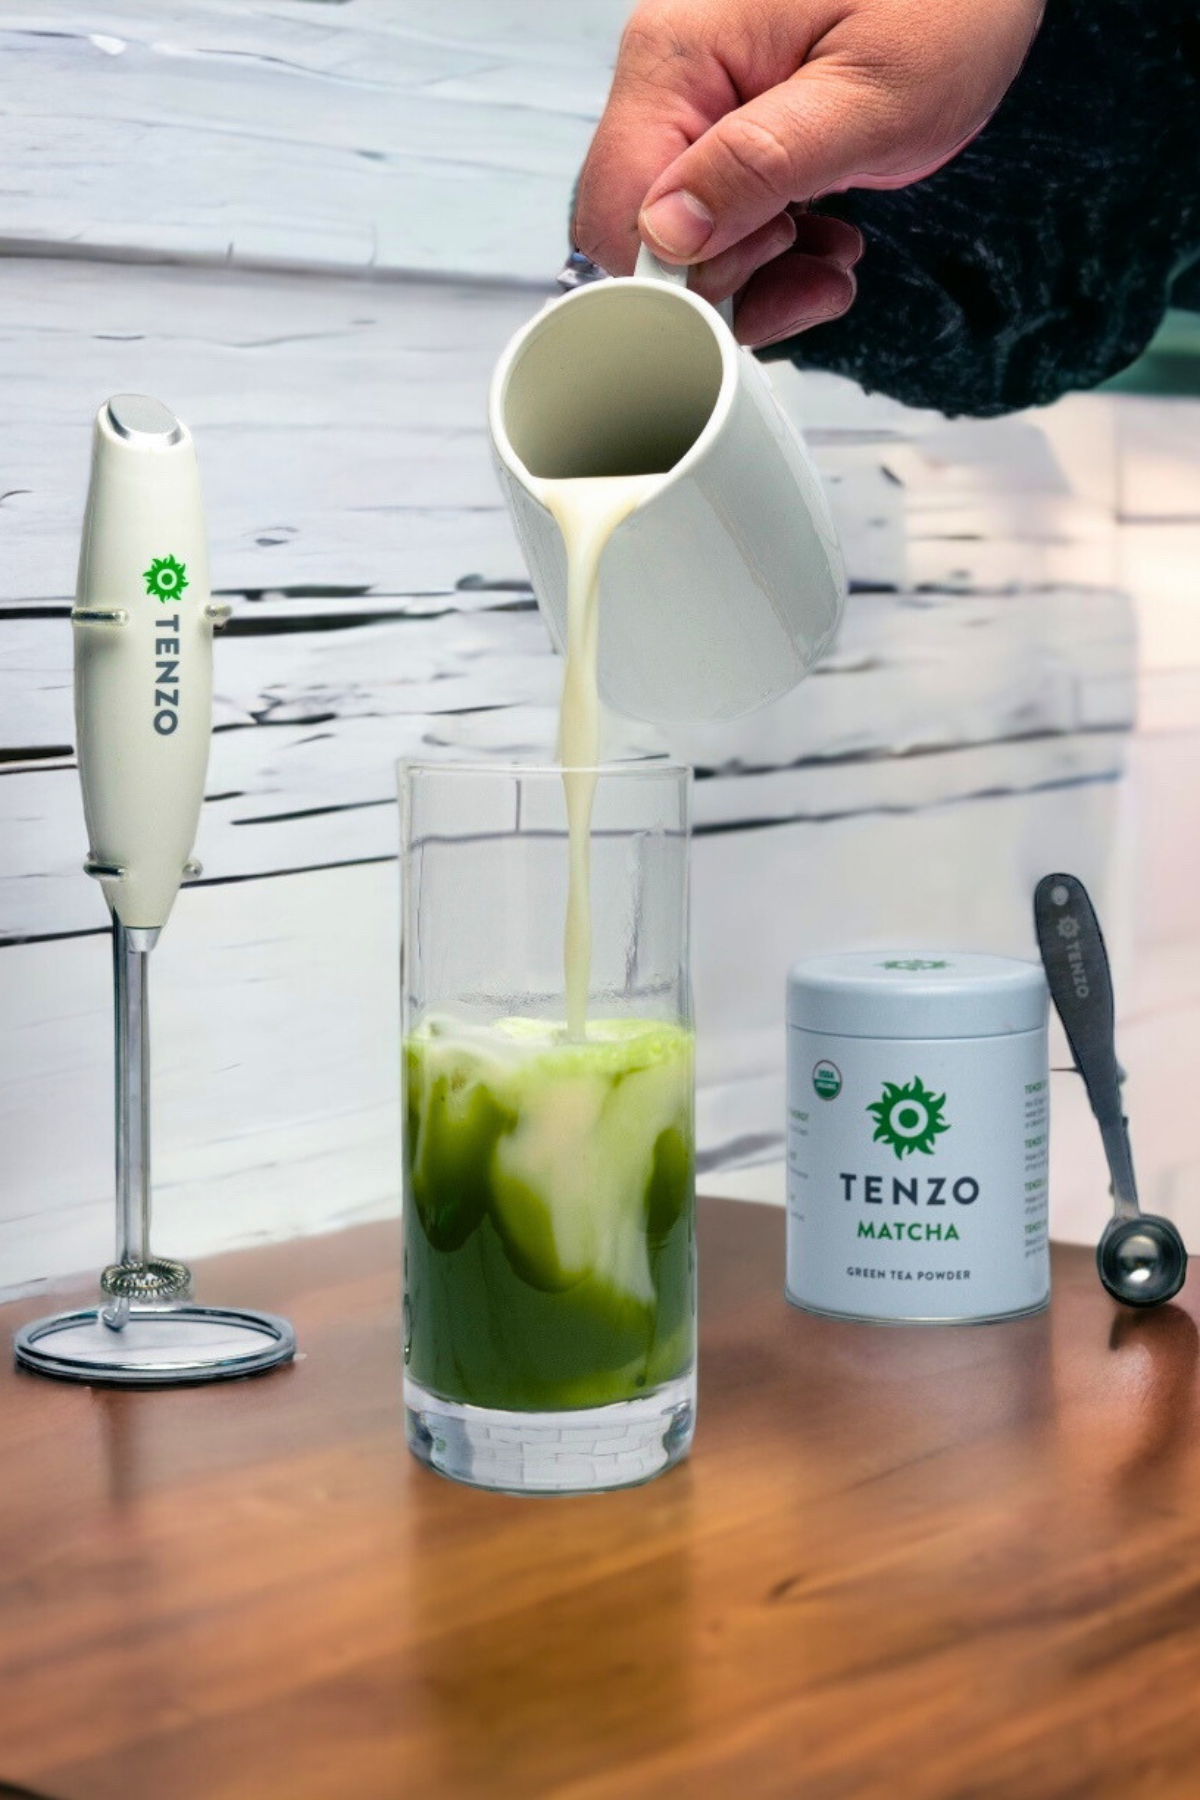 Give the Gift of Health: Share the Love and Wellness with Tenzo Matcha this Holiday Season. Perfect for Friends and Family!